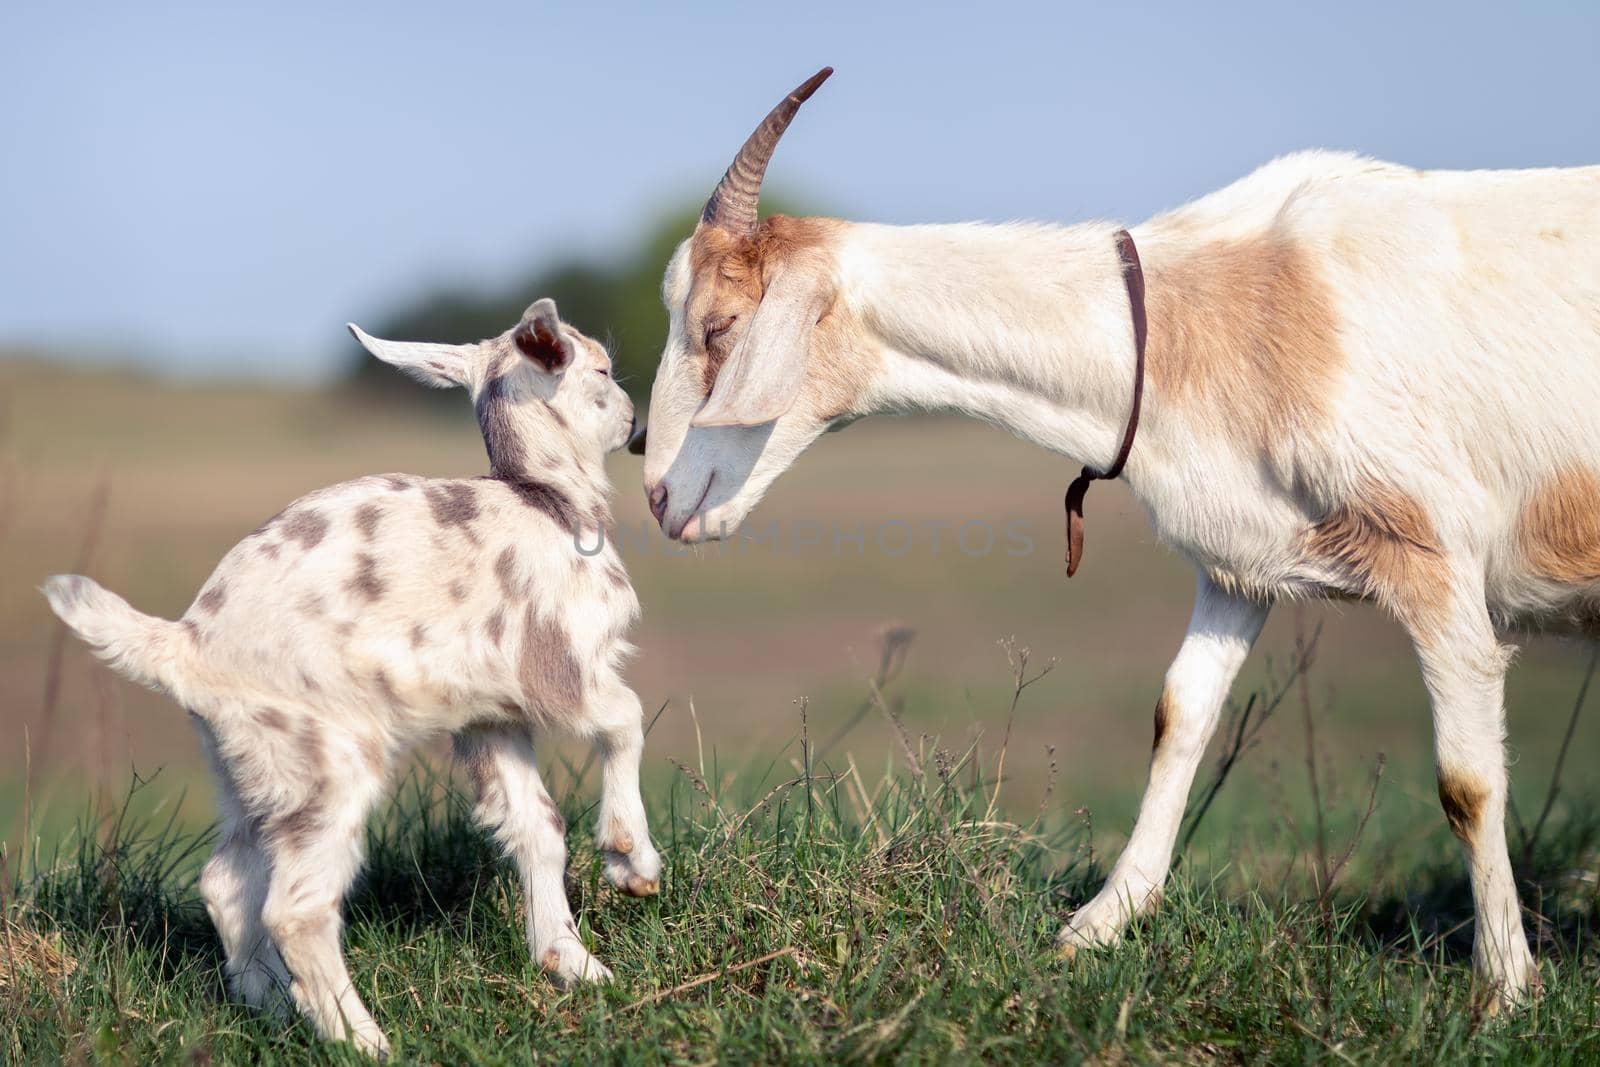 Mom's love and solicitude for her little goatling